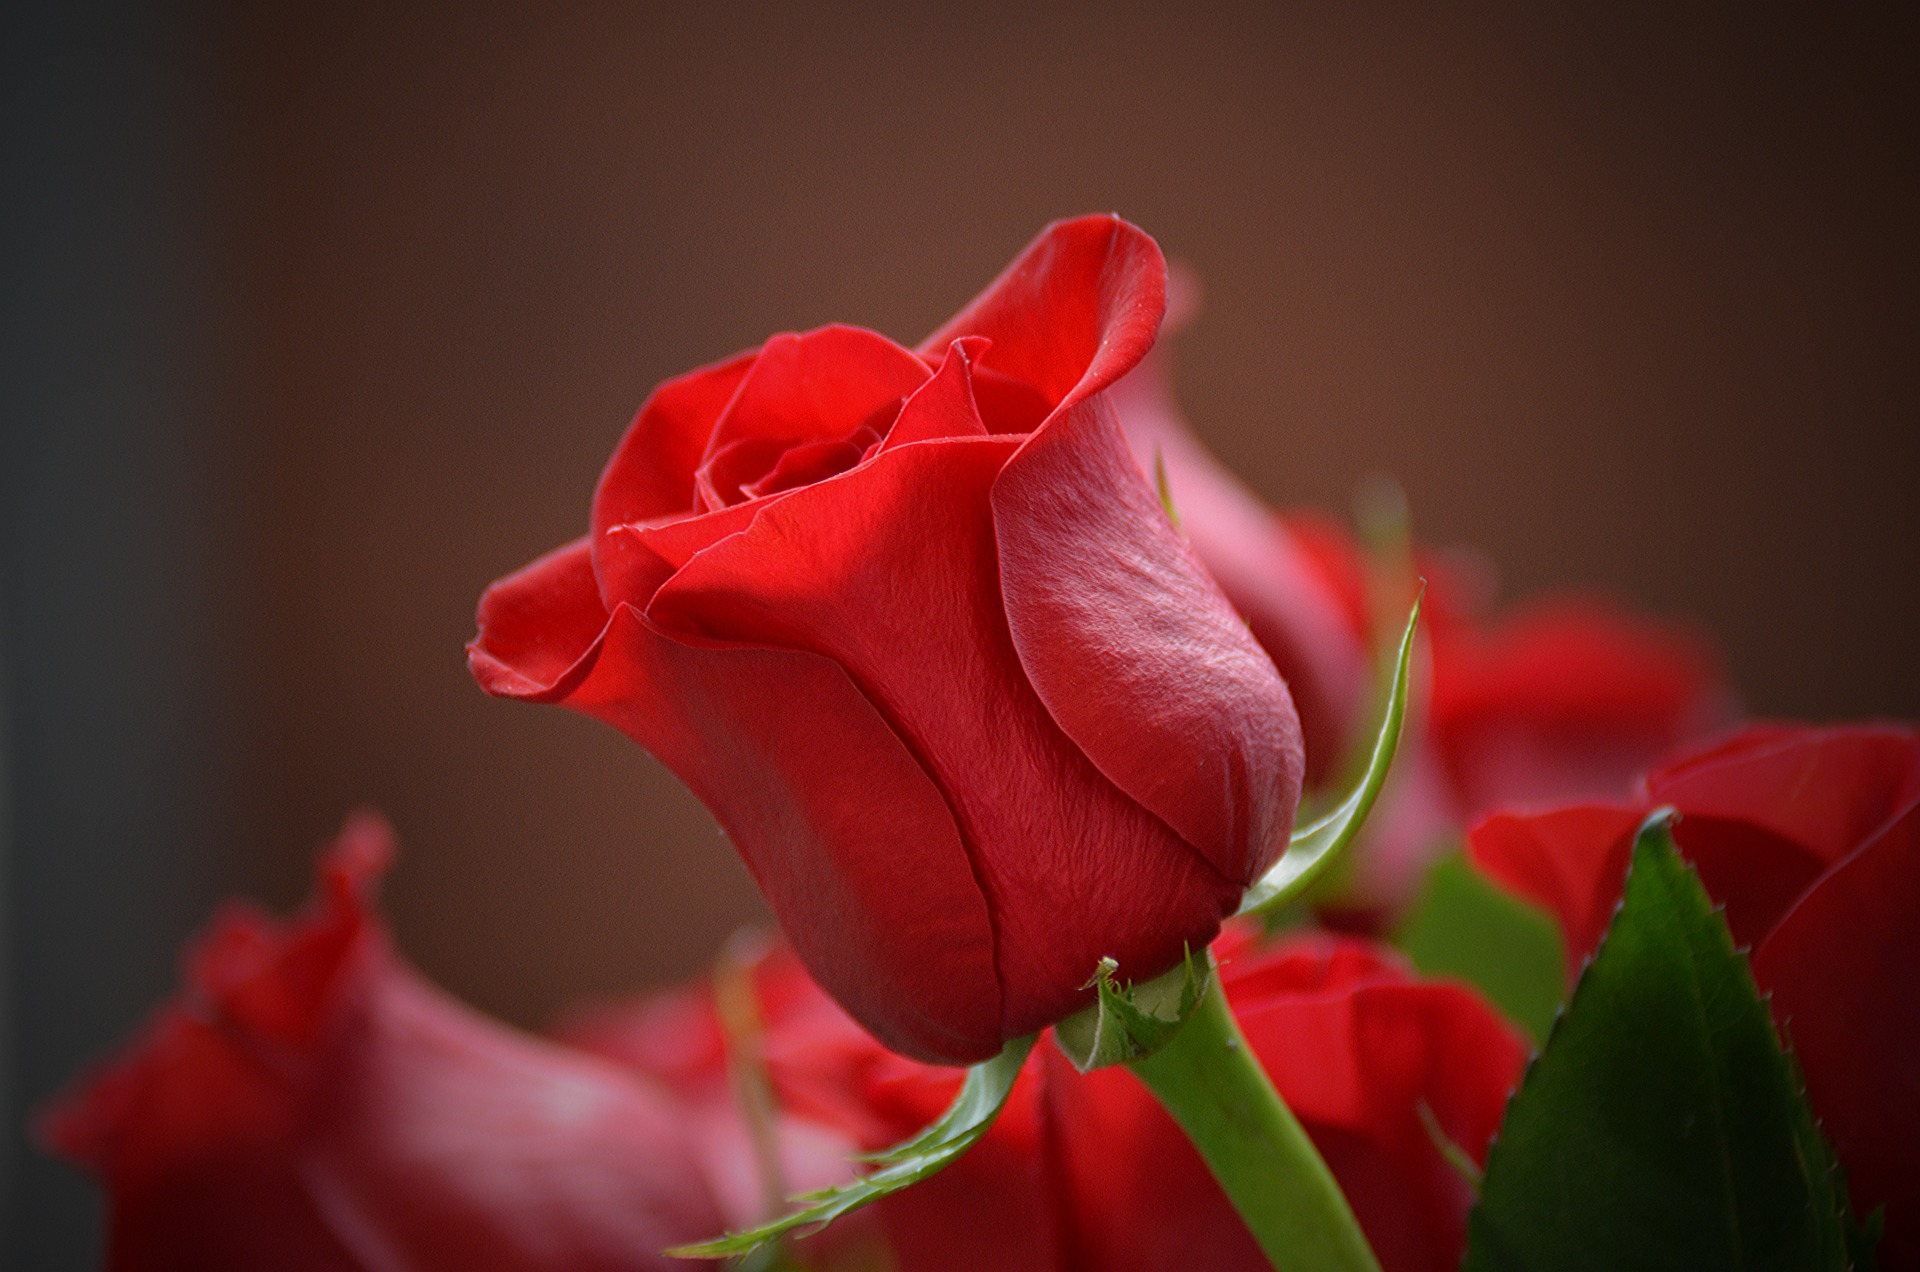 Happy Rose day wishes, messages for your Love